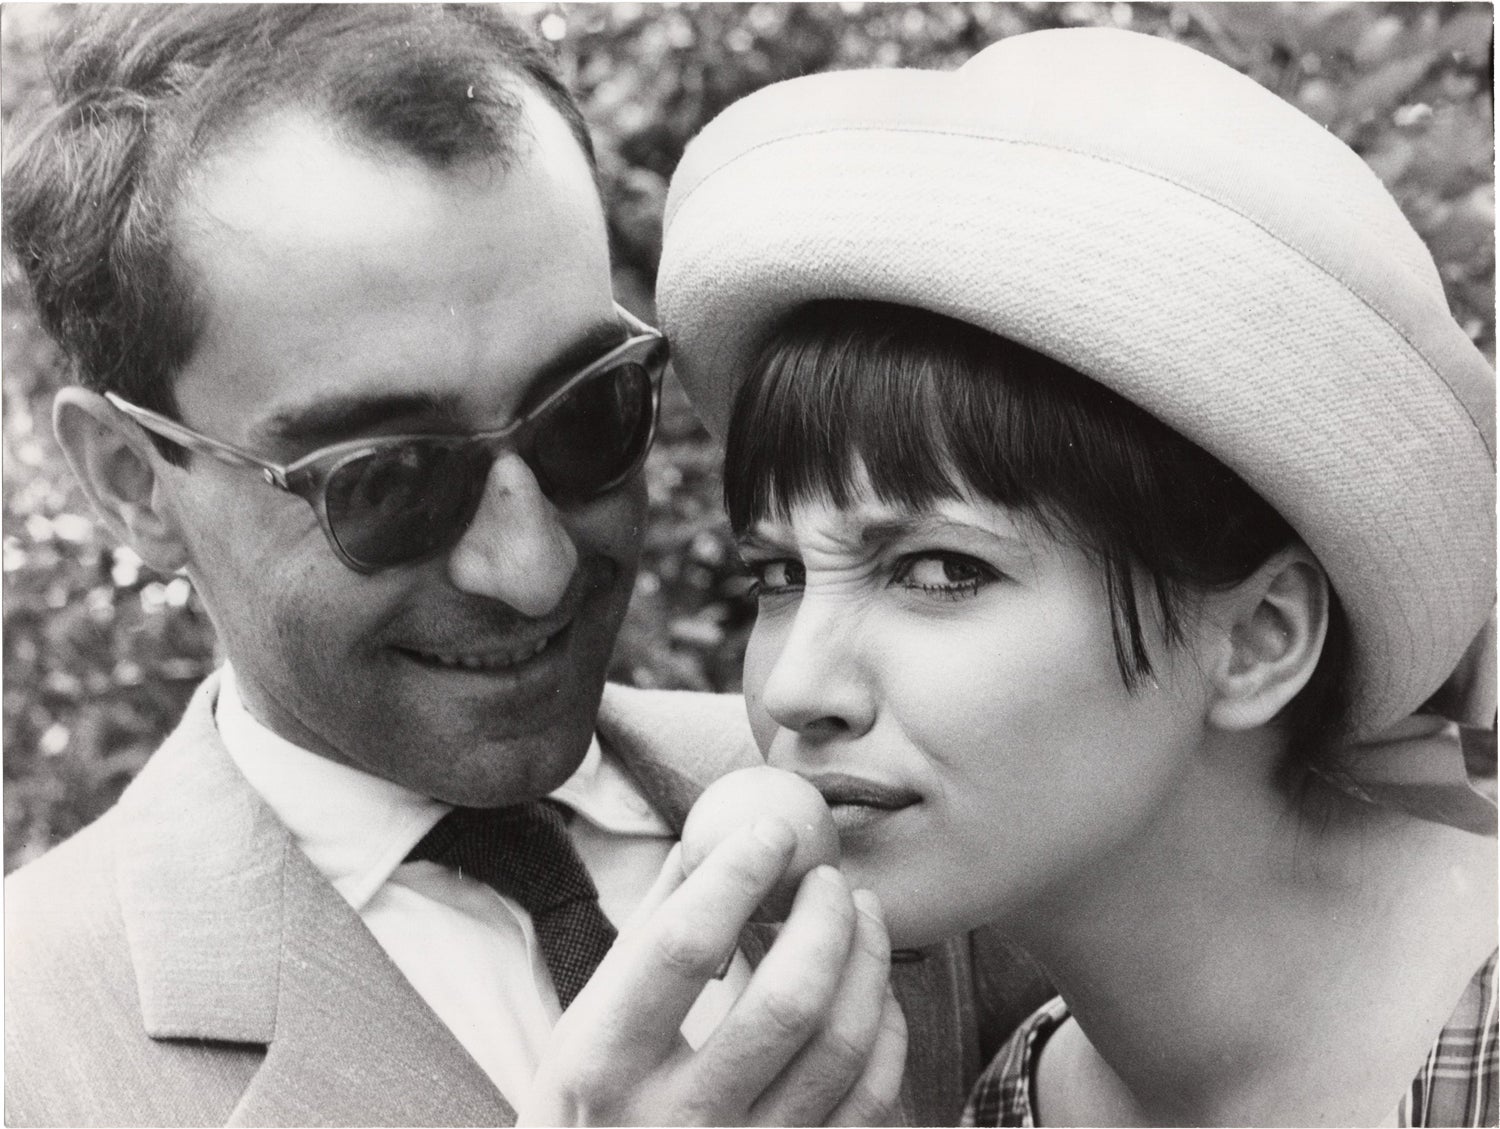 Jean-Luc Godard, iconic French New Wave director, dies at 91 | AP News